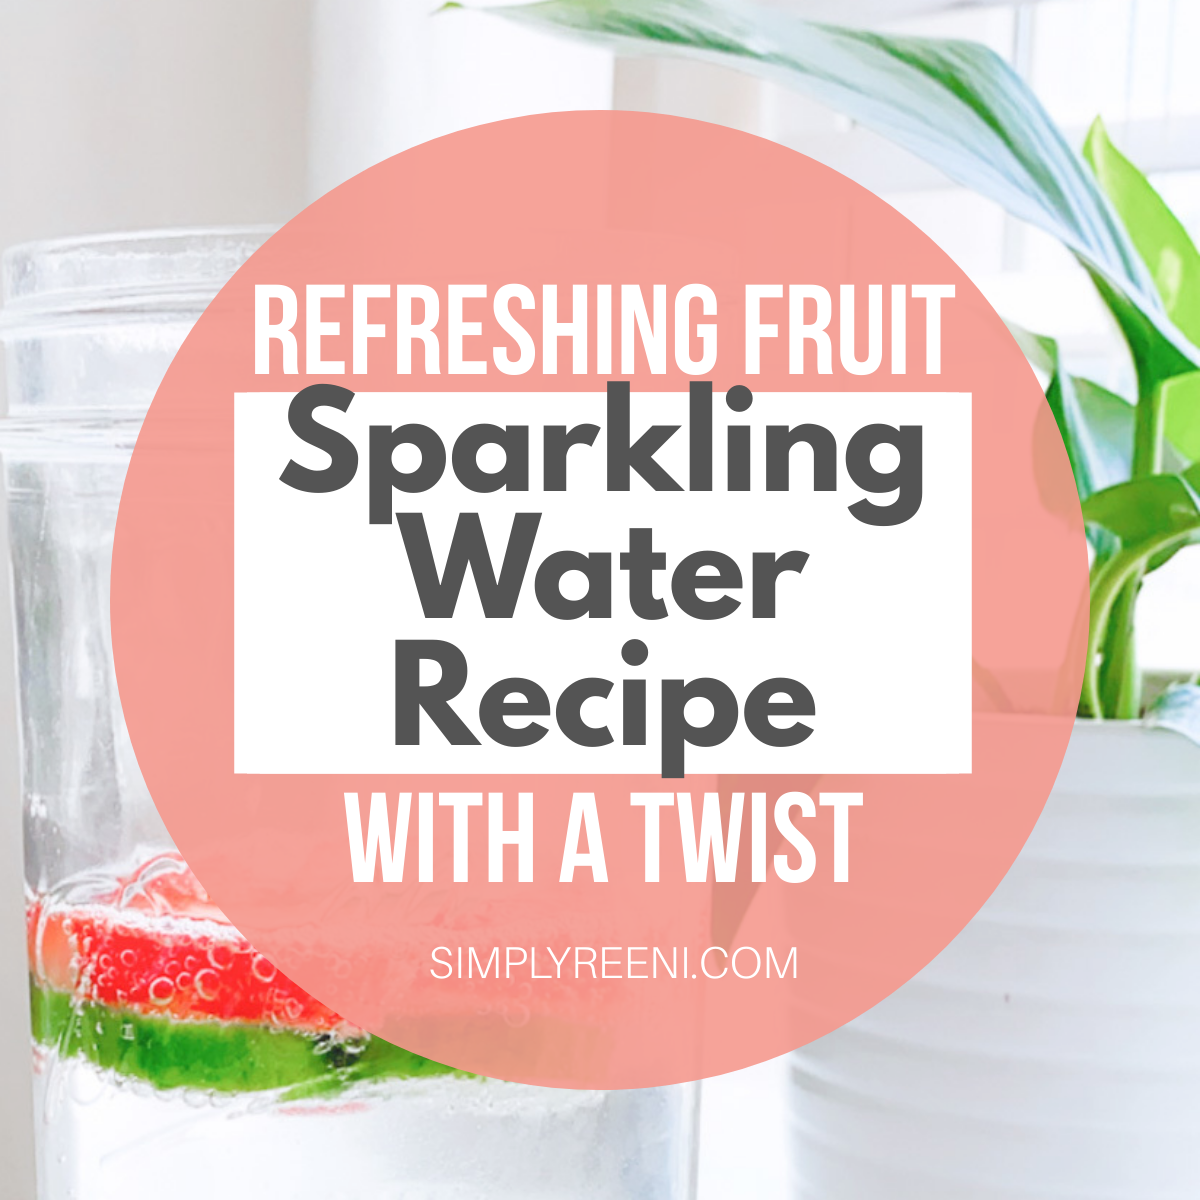 Refreshing Fruit Sparkling Water Recipe with a Twist